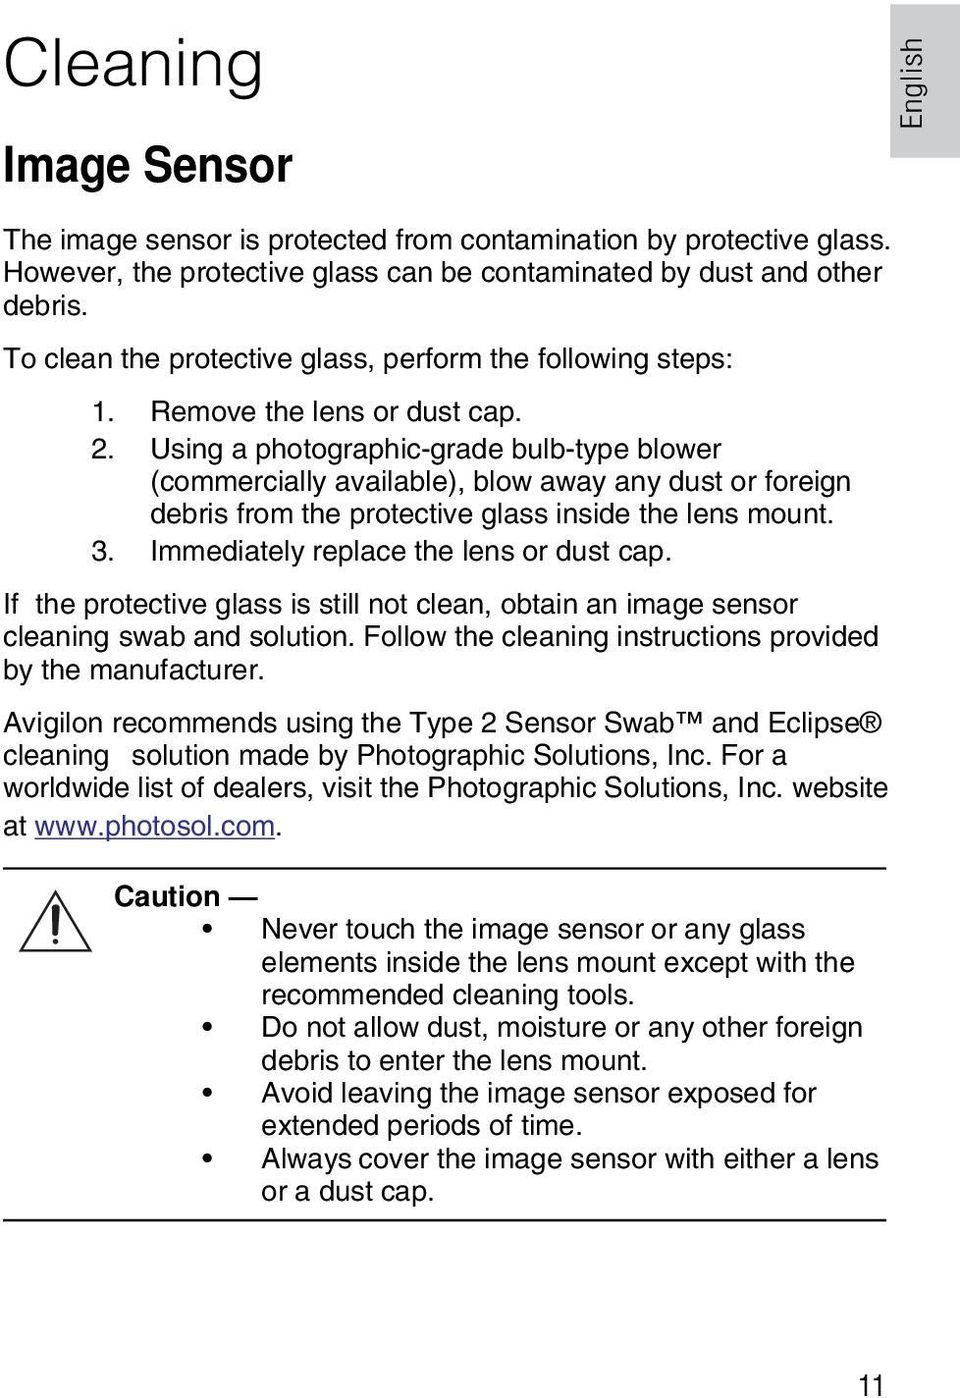 Using a photographic-grade bulb-type blower (commercially available), blow away any dust or foreign debris from the protective glass inside the lens mount. 3. Immediately replace the lens or dust cap.